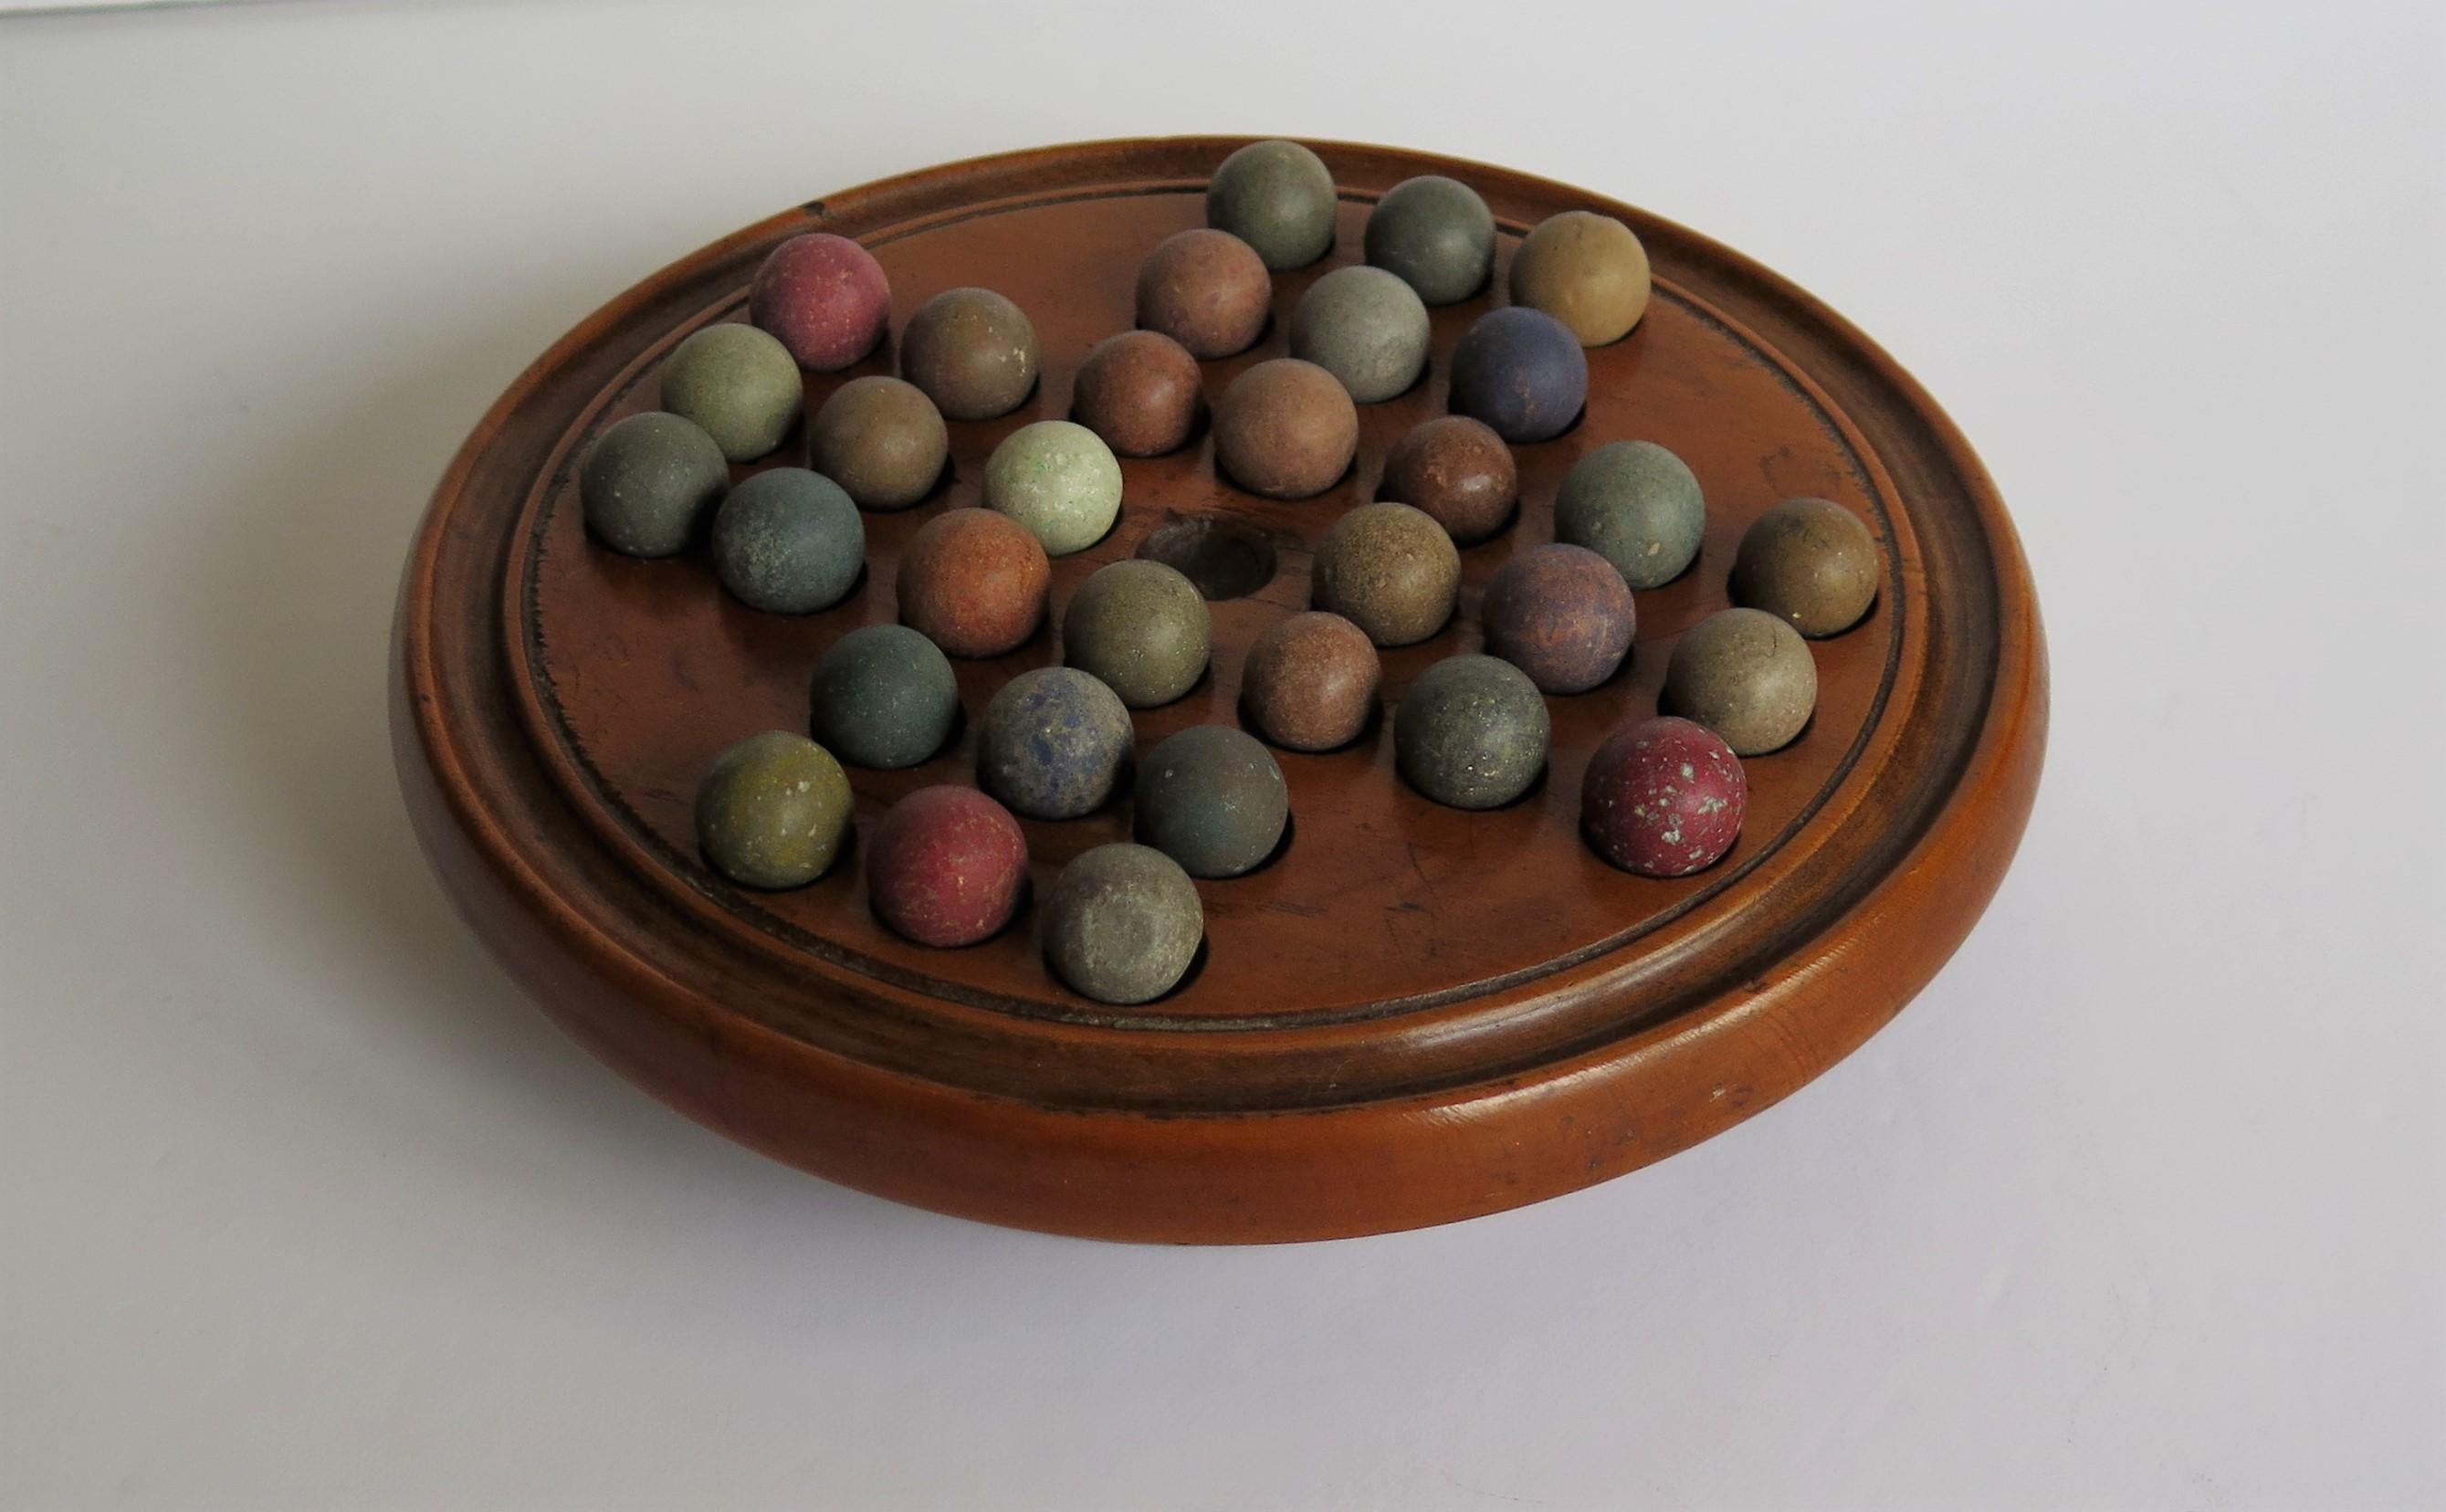 Turned 19th Century Travelling Marble Solitaire Game with 32 Handmade Clay Marbles